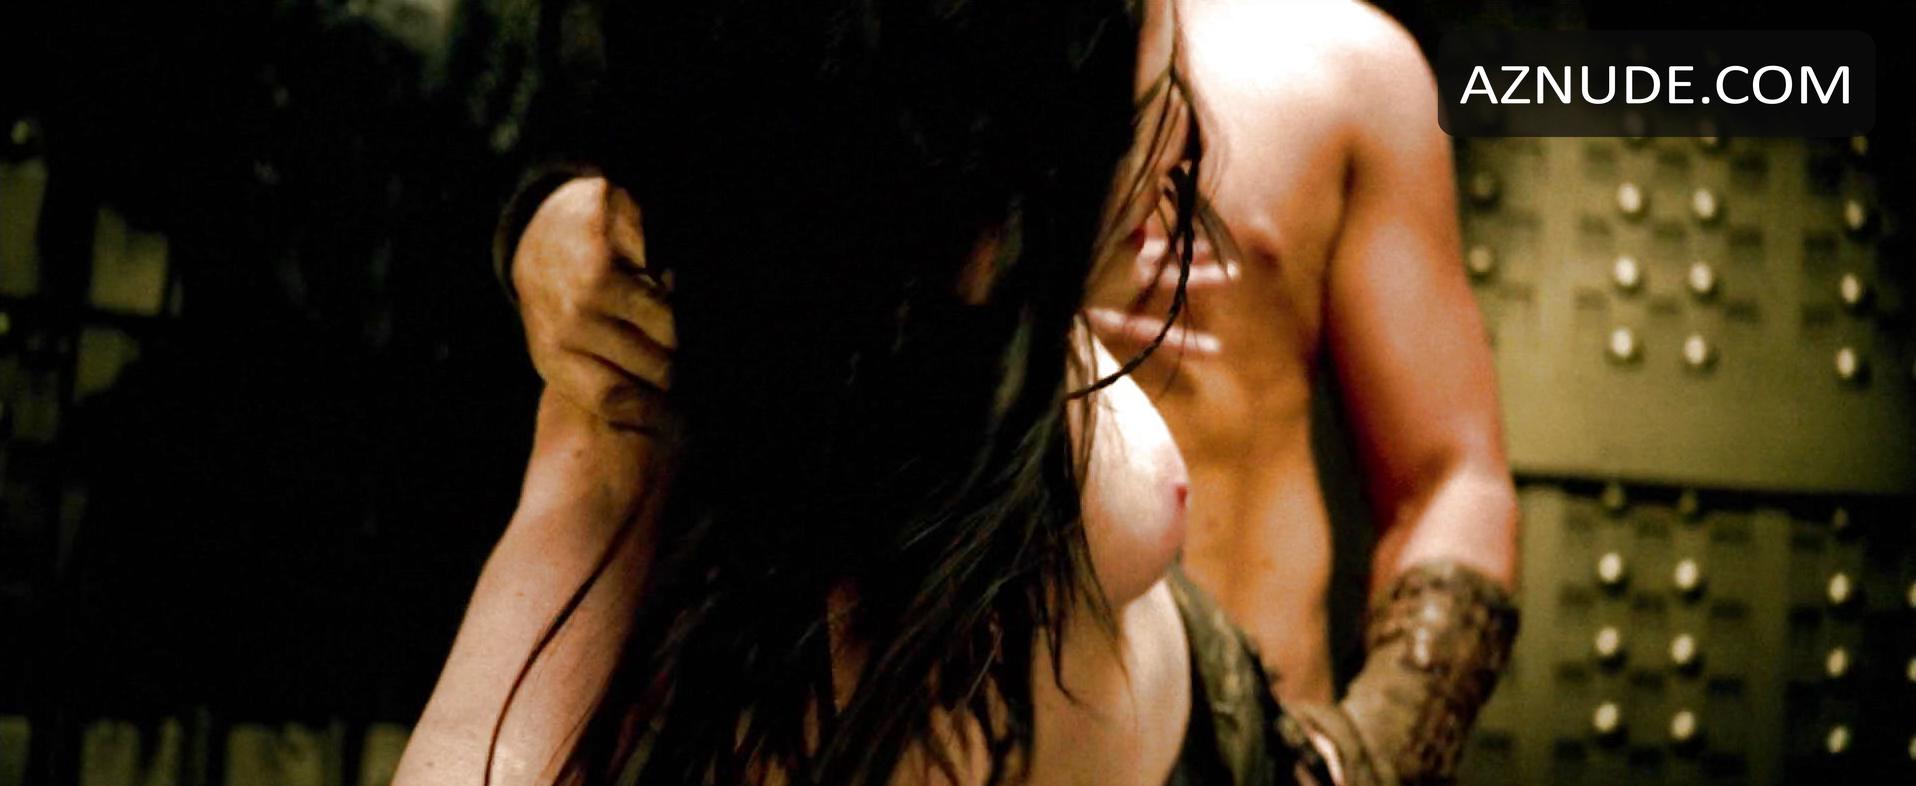 cortney crow recommends 300 rise of an empire sex scene pic